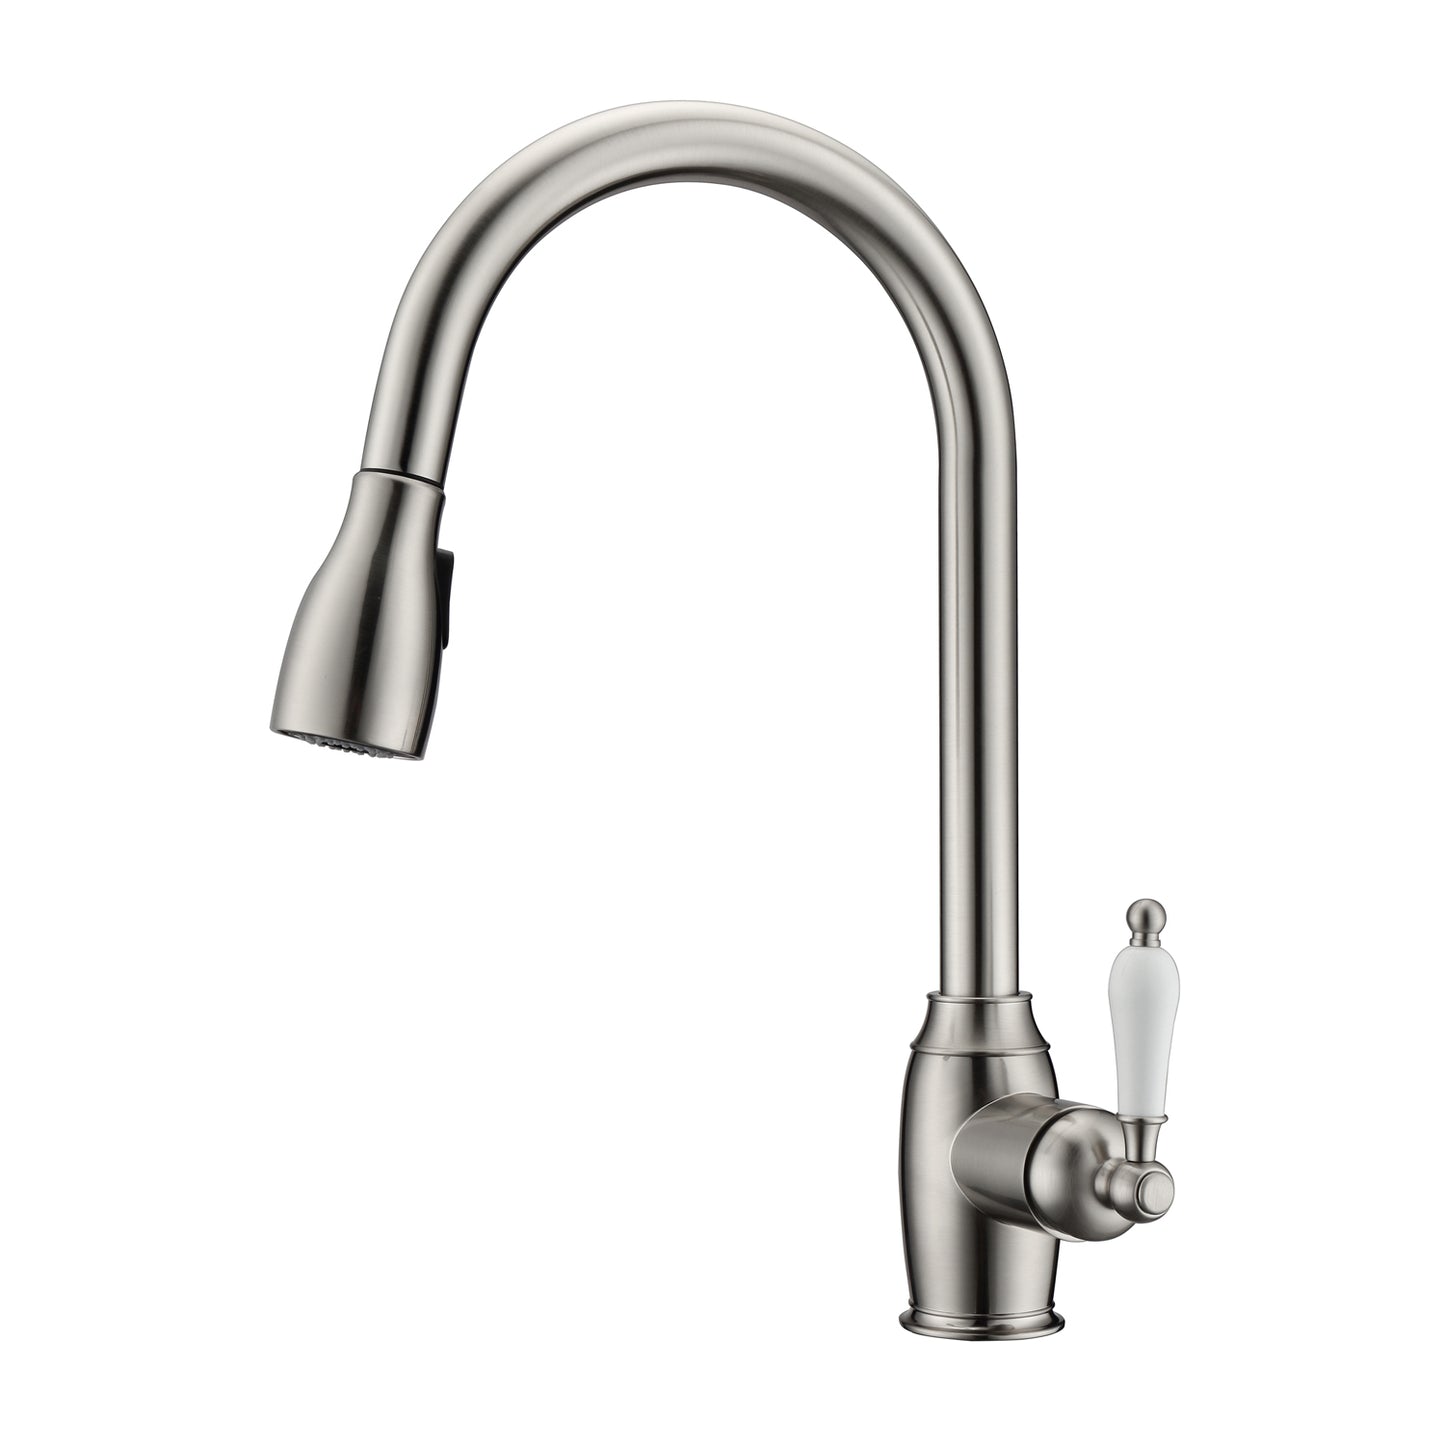 Bristo Kitchen Faucet, Pull-Out Sprayer, Single Porcelain Lever Handle, Brushed Nickel